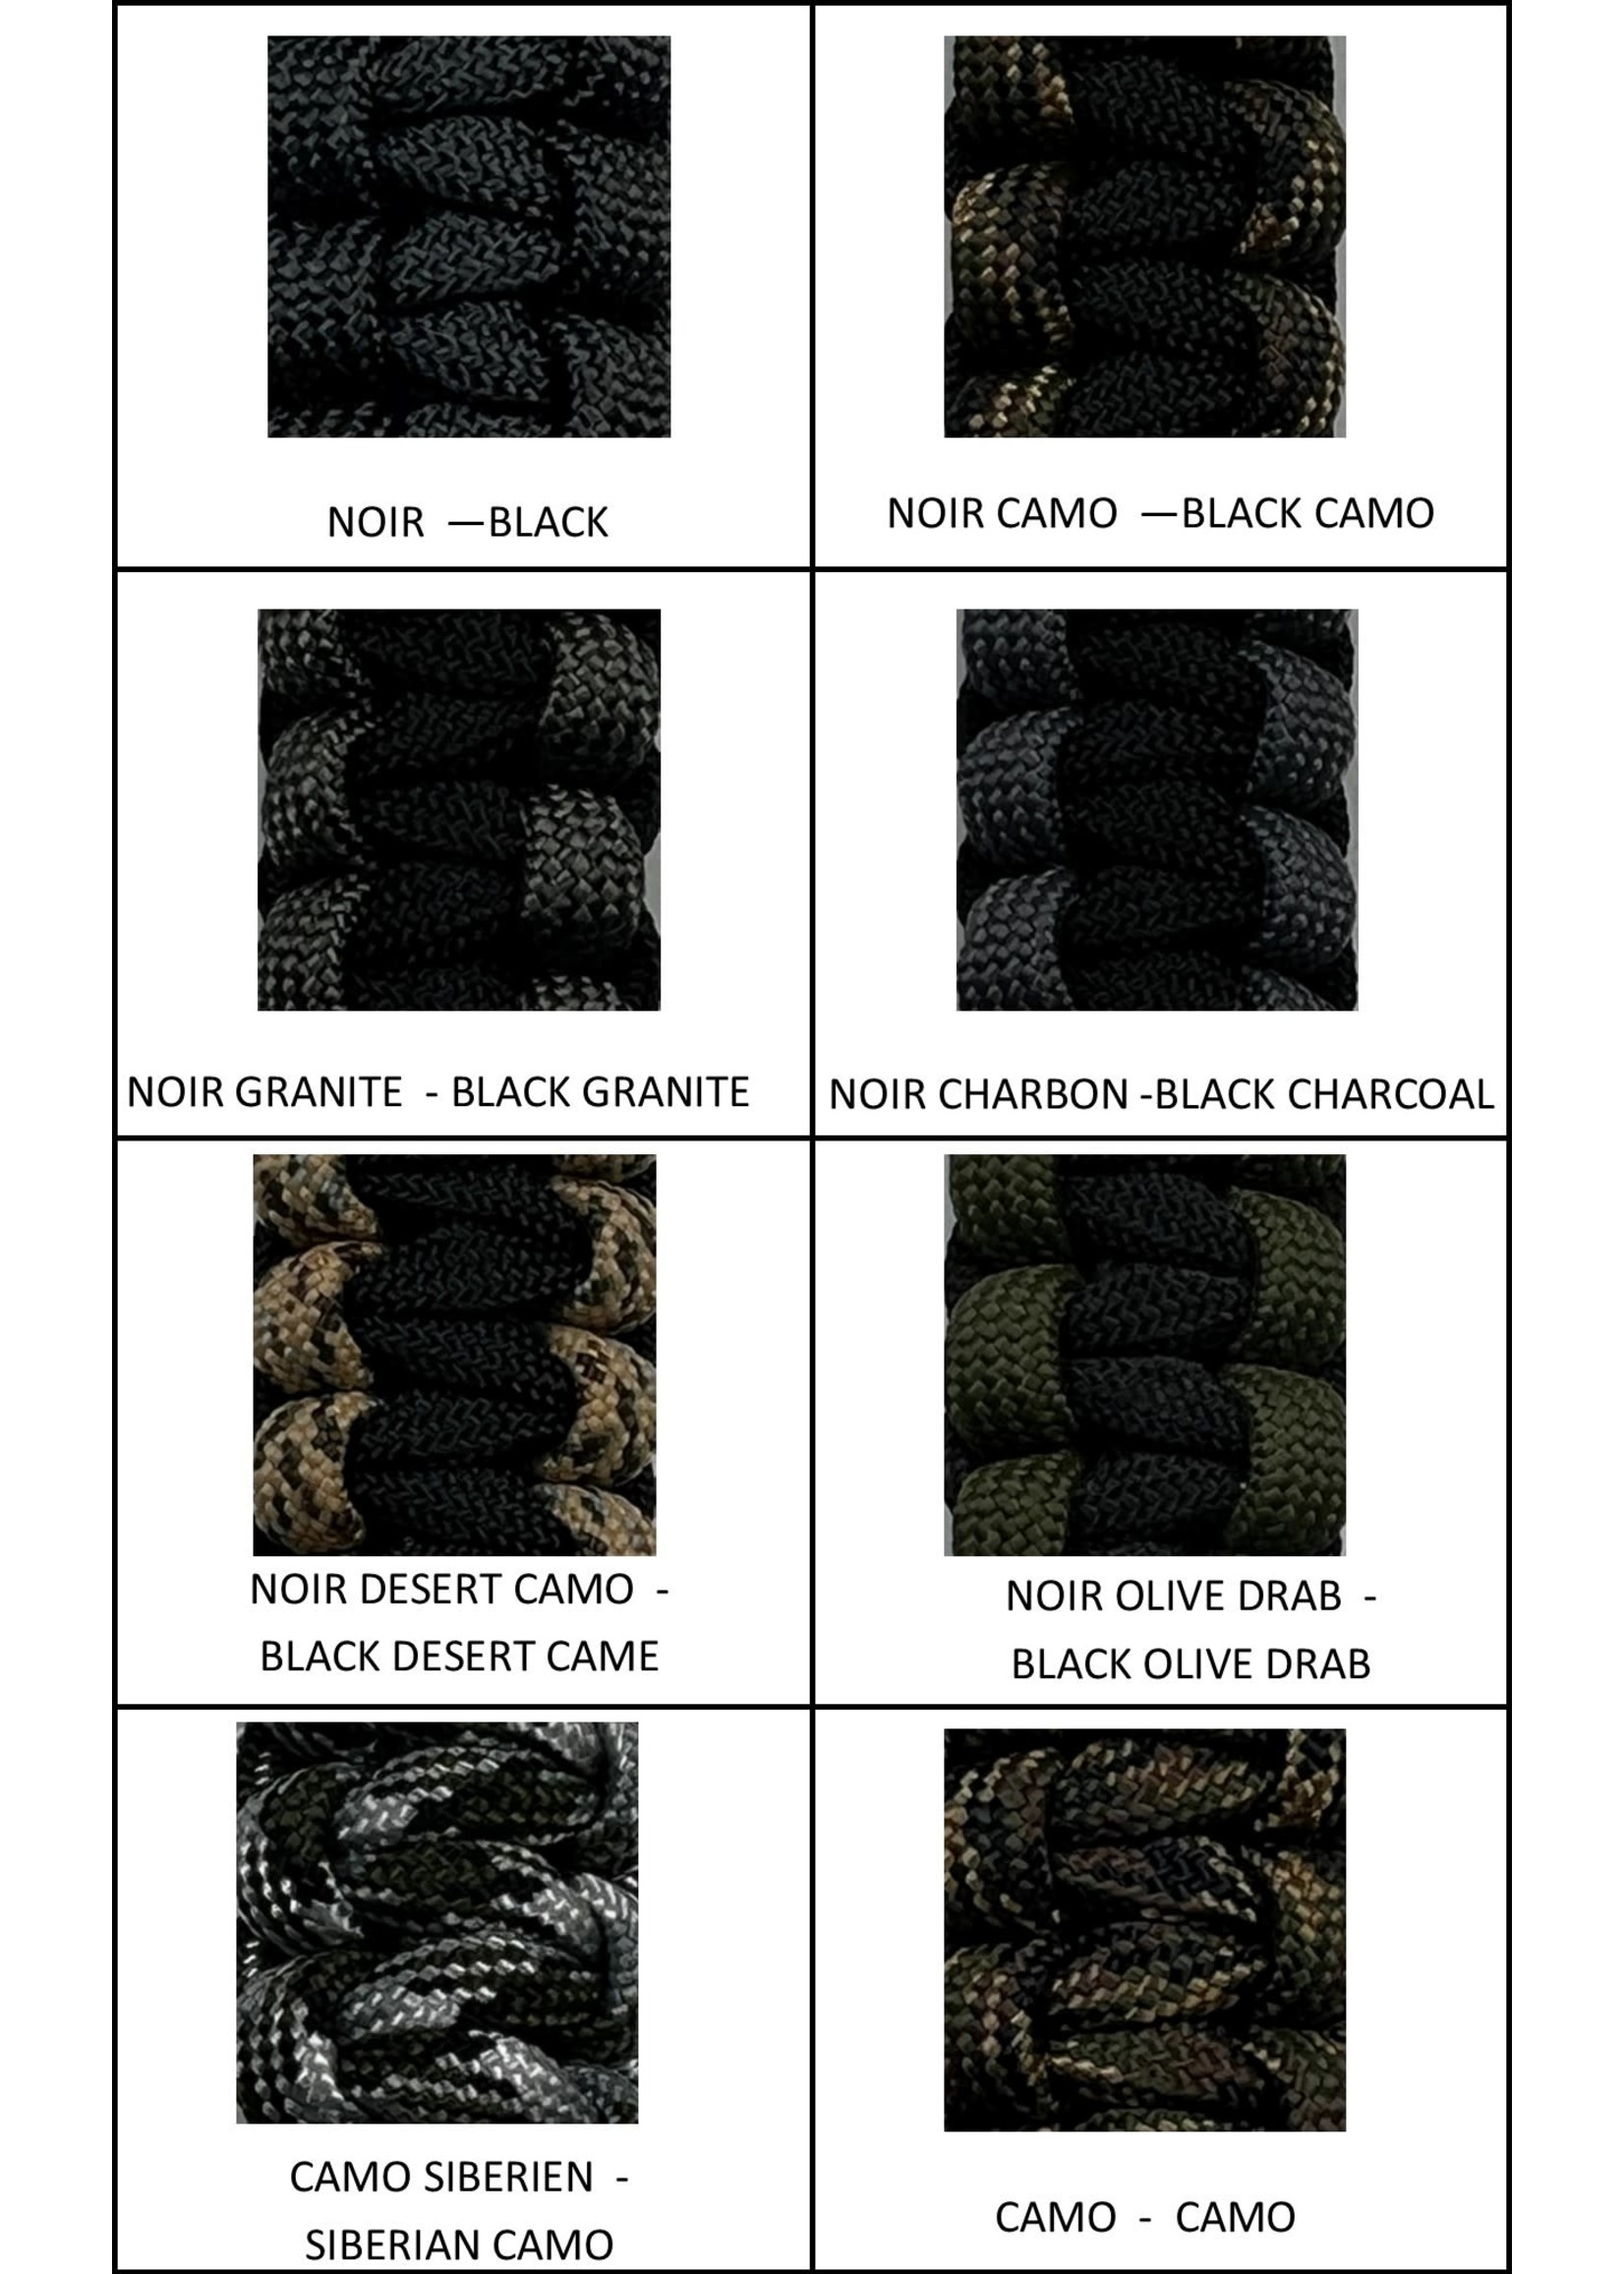 Jakt Gear My sling-a-ling magnetic paracord bow sling